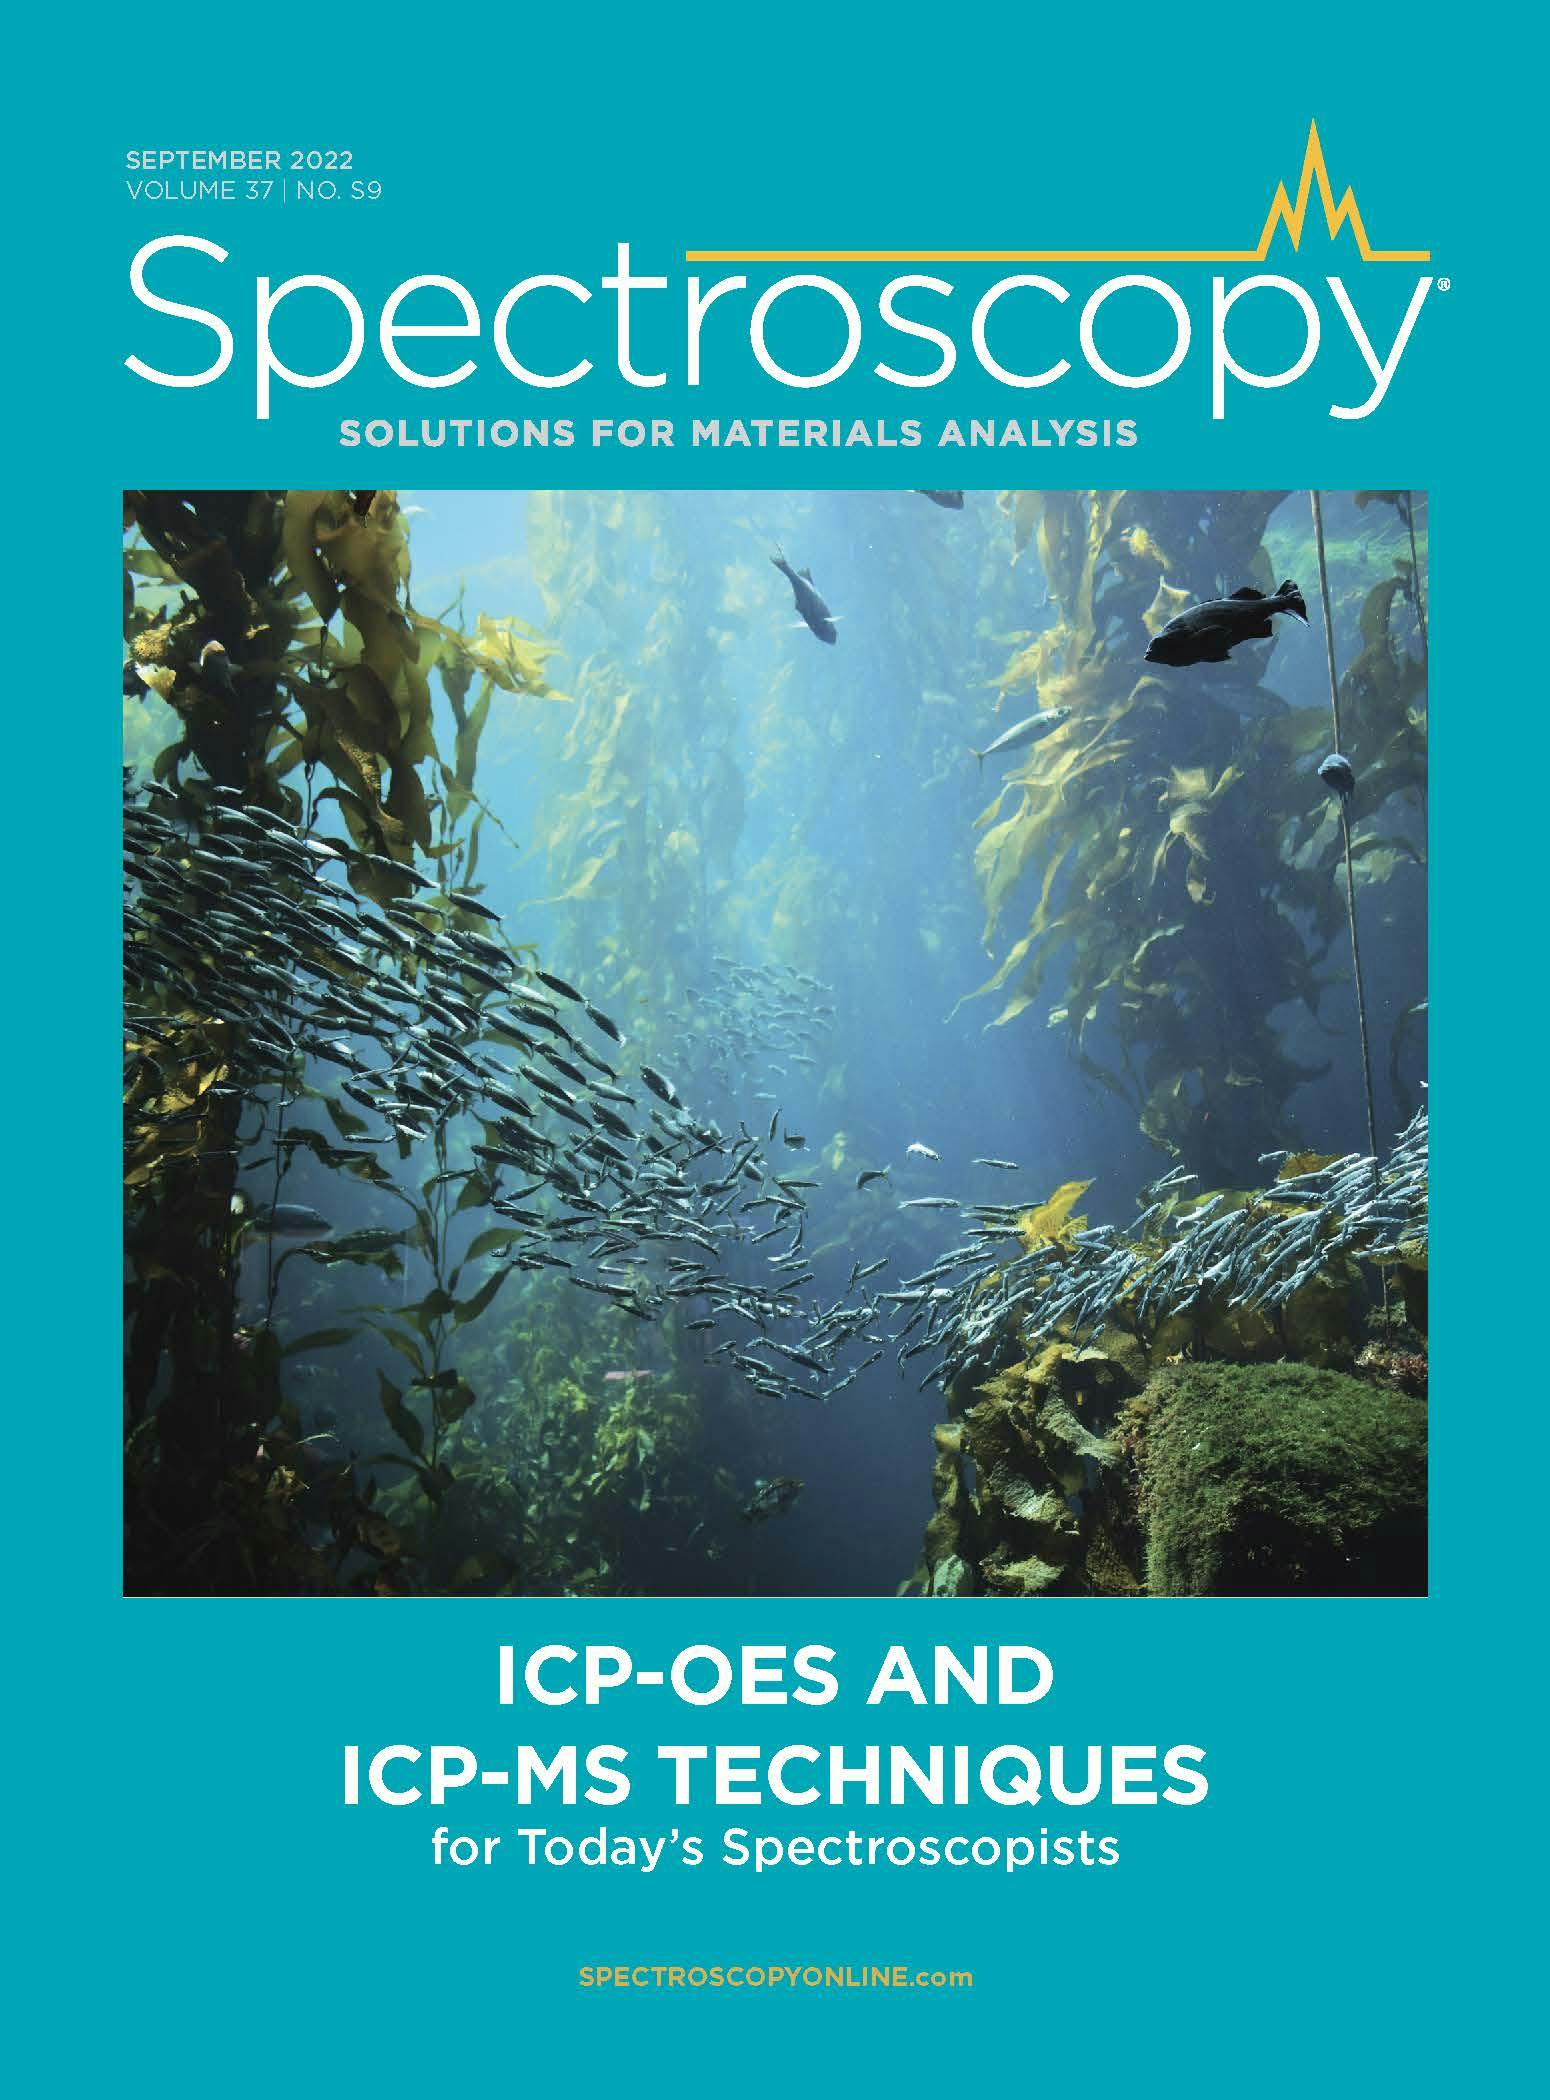 ICP-OES and ICP-MS Techniques for Today's Spectroscopists